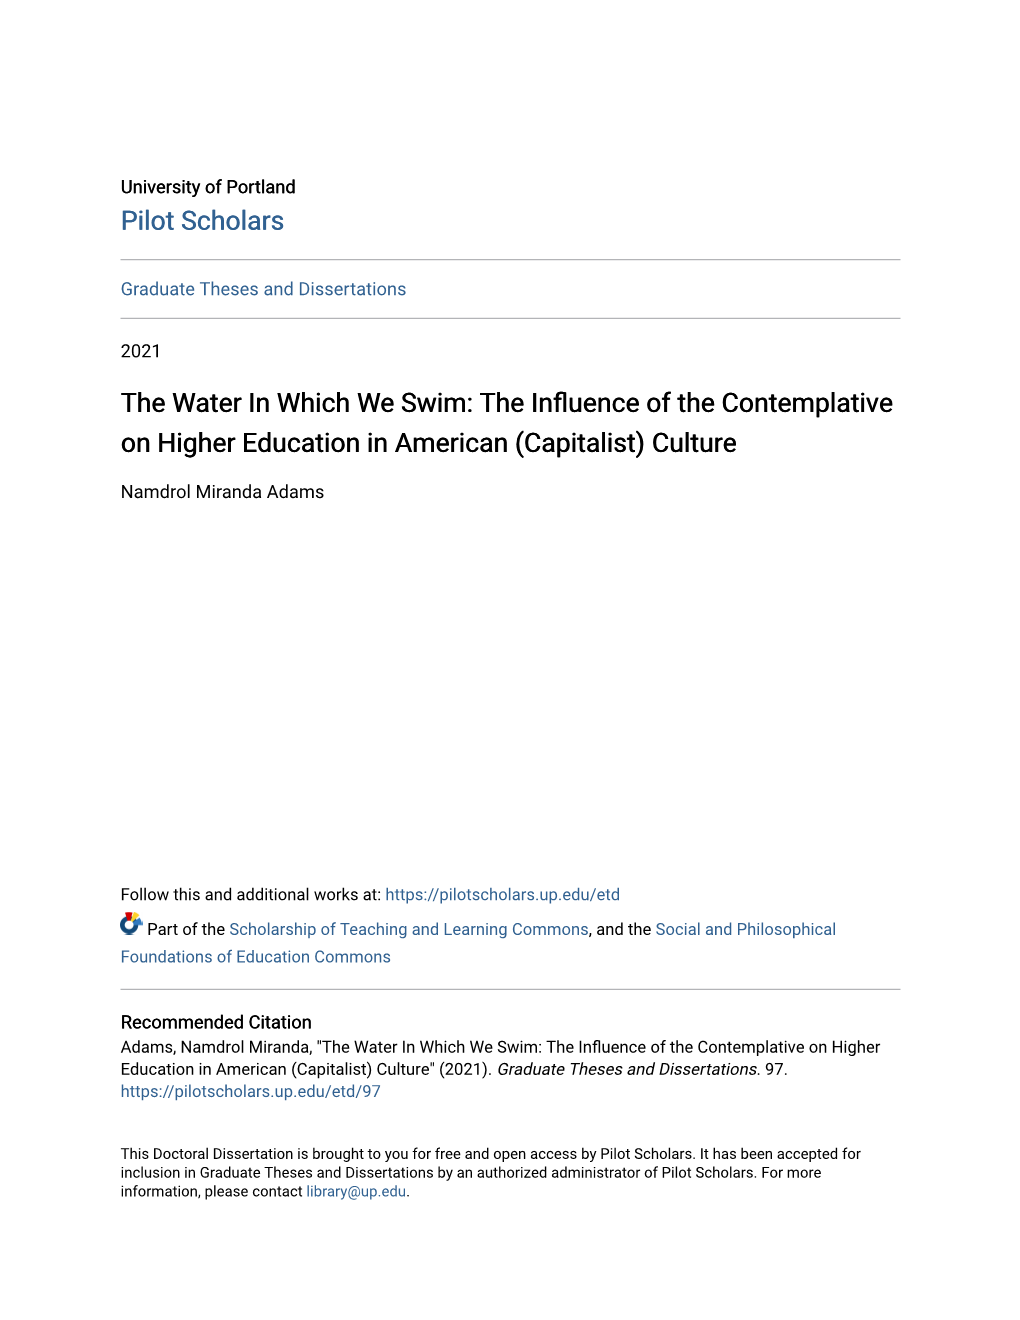 The Influence of the Contemplative on Higher Education in American (Capitalist) Culture